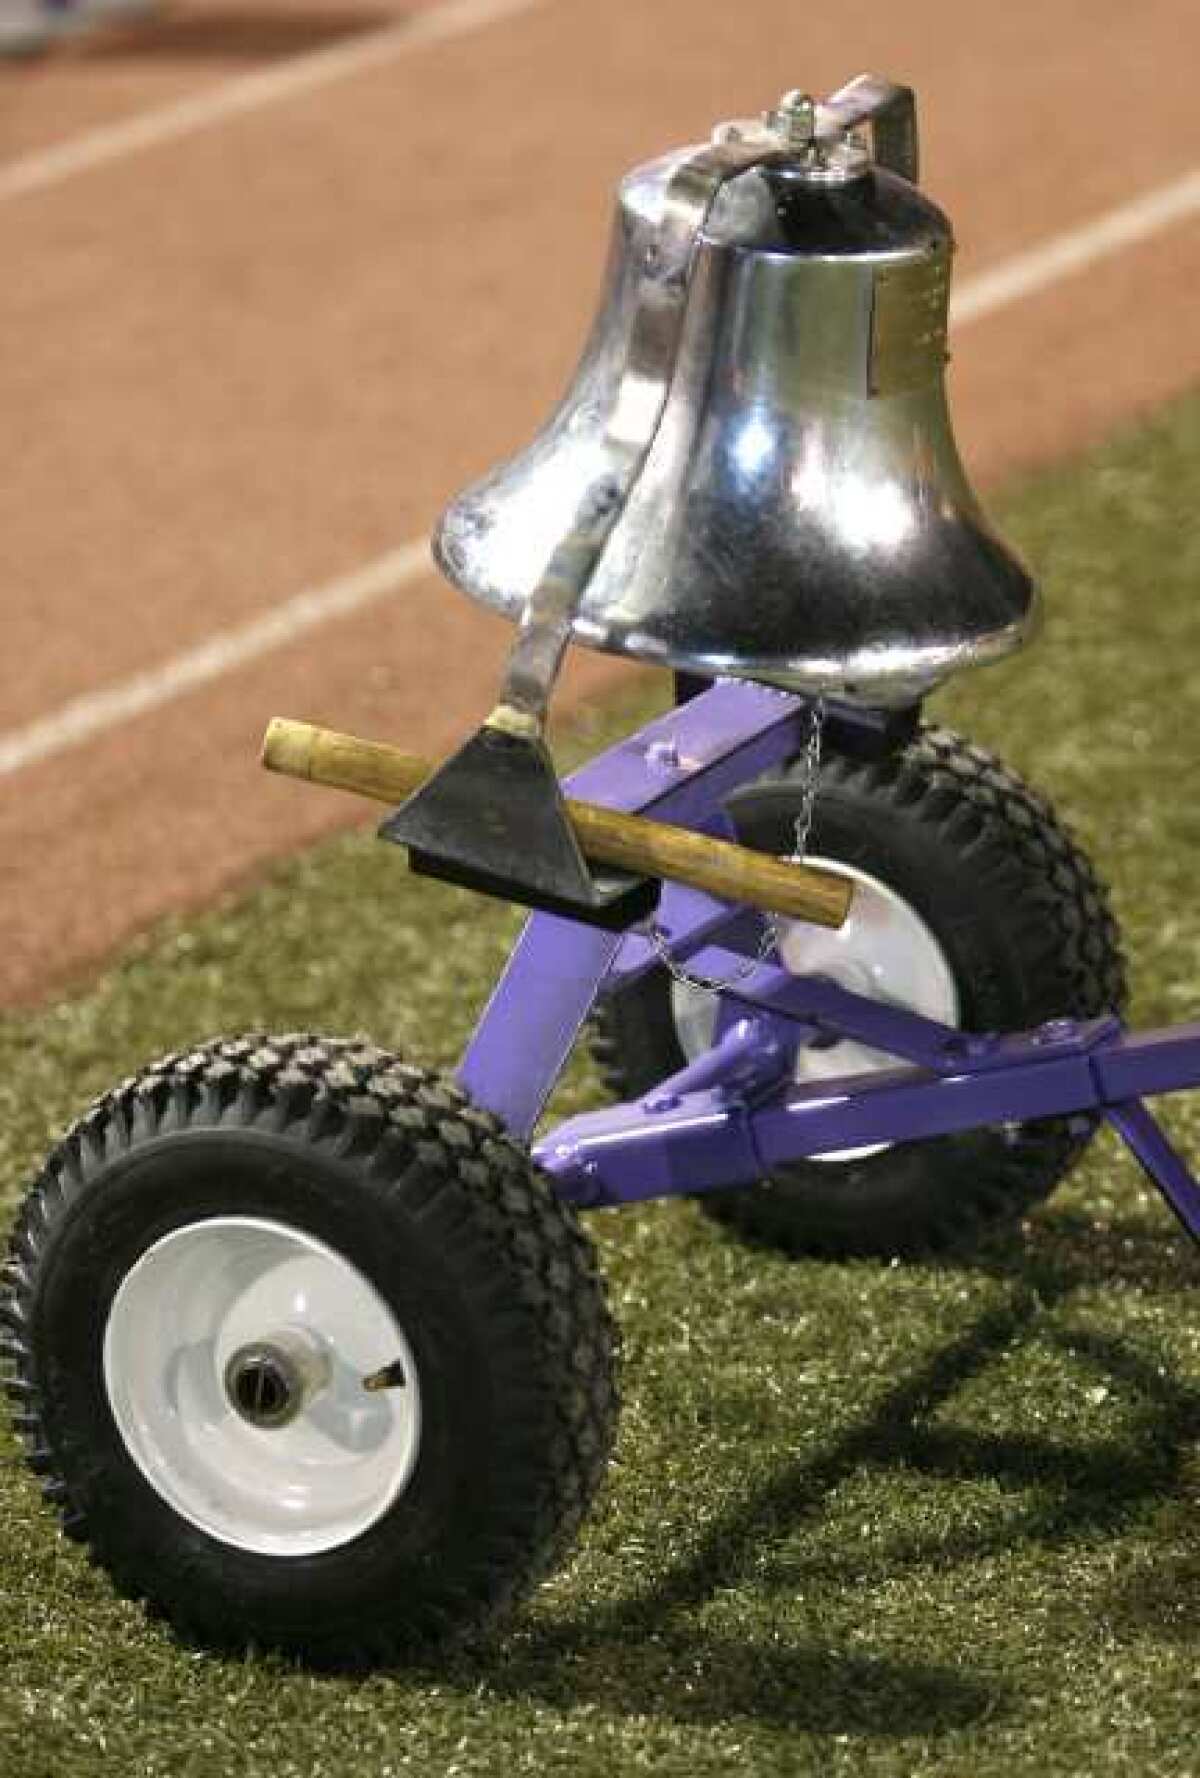 ARCHIVE PHOTO: The victory bell will be on the line when Glendale and Hoover face off at Moyse Field on Friday.